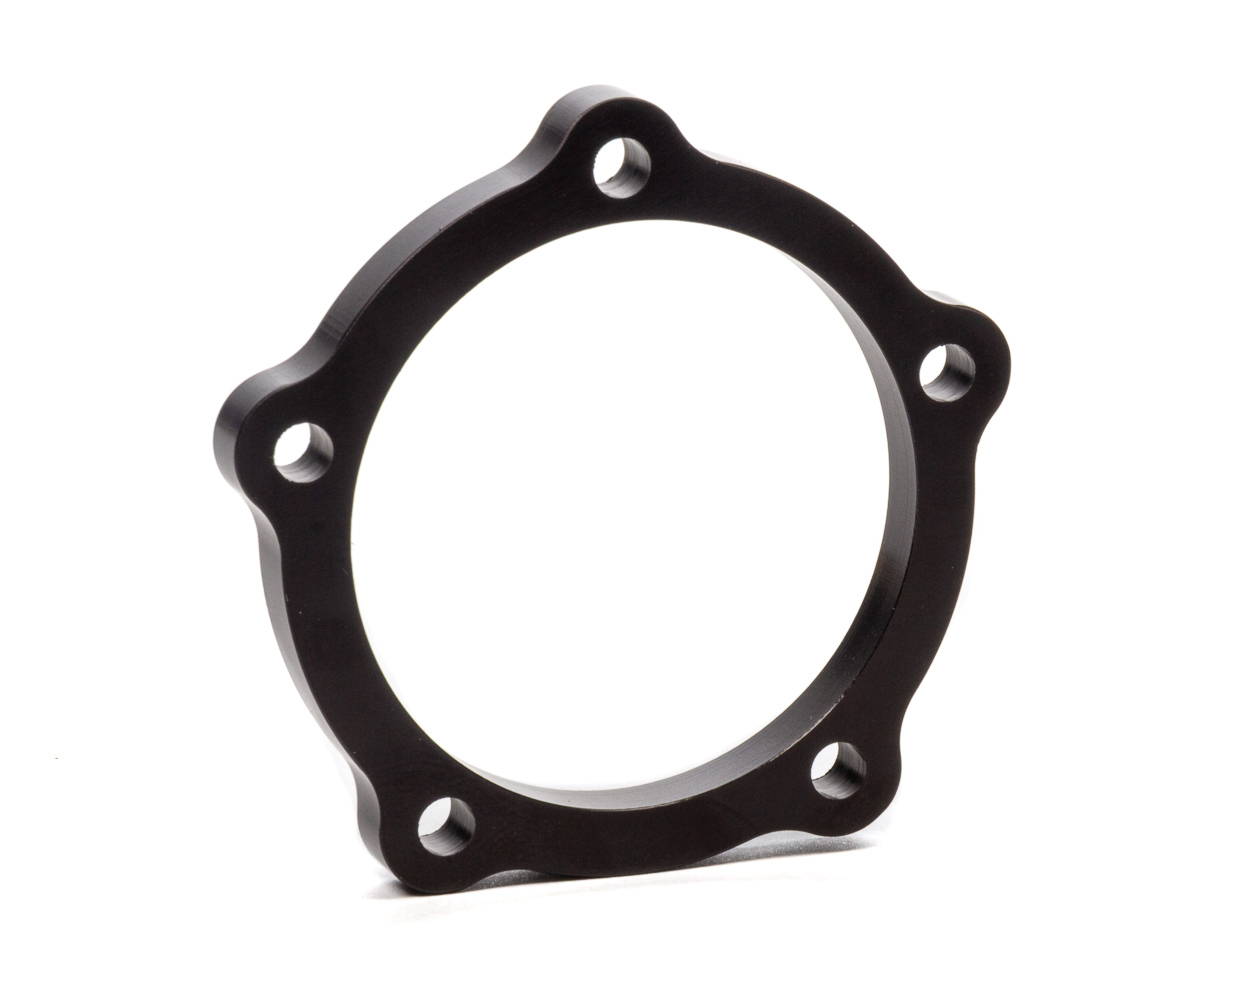 Triple X Race Components 600-BK-8233BLK Brake Rotor Spacer, 0.250 in Thick, Front, Drivers Side, Aluminum, Black Anodized, Keizer Hubs, Mini Sprint, Each